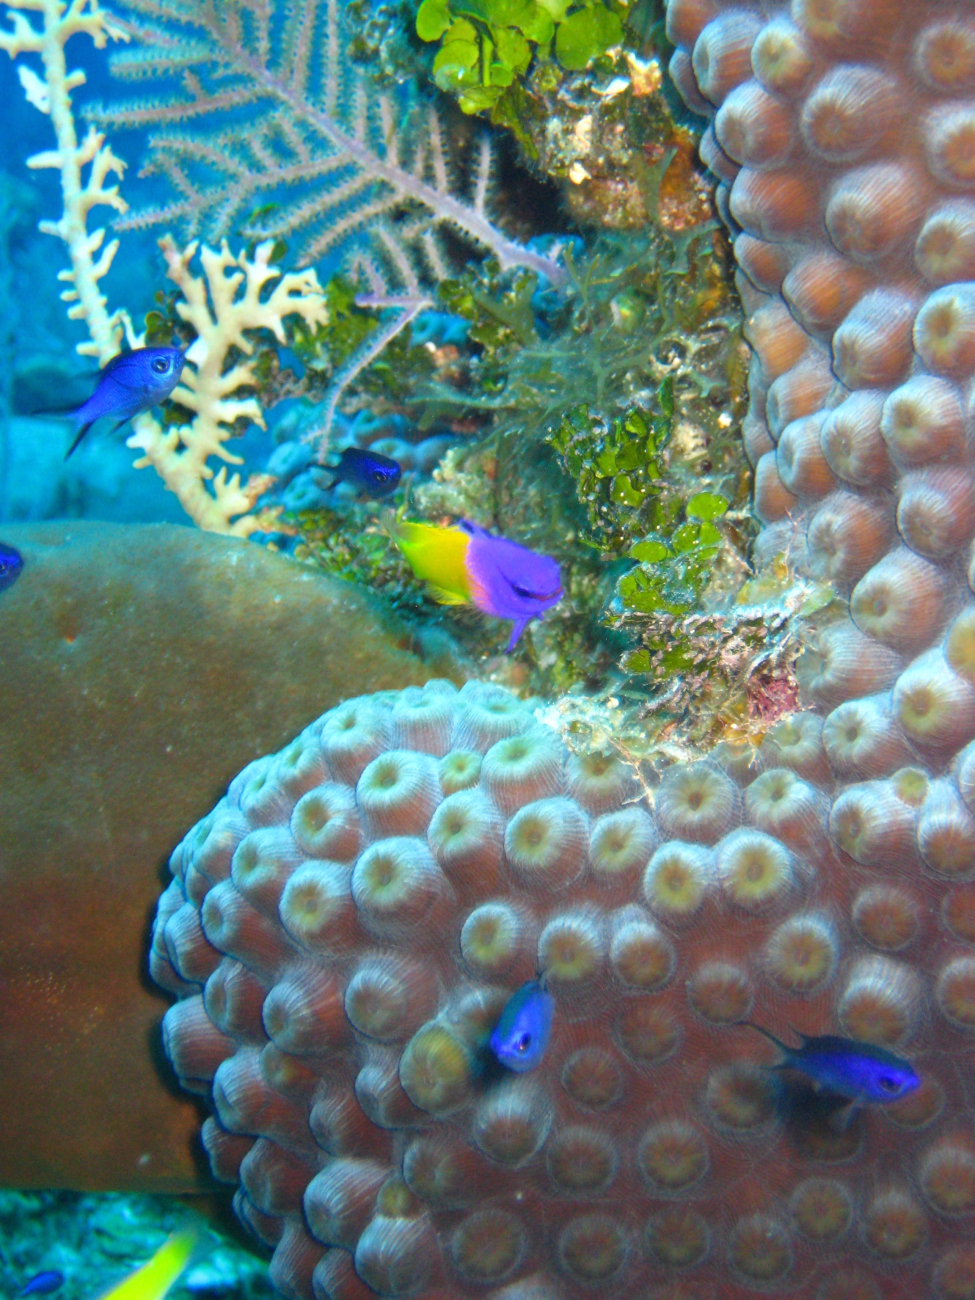 Star coral, blue chromis, fire coral, branched hydrozoan, green algae, and apurple and yellow fairy basslet (Gramma loreto)